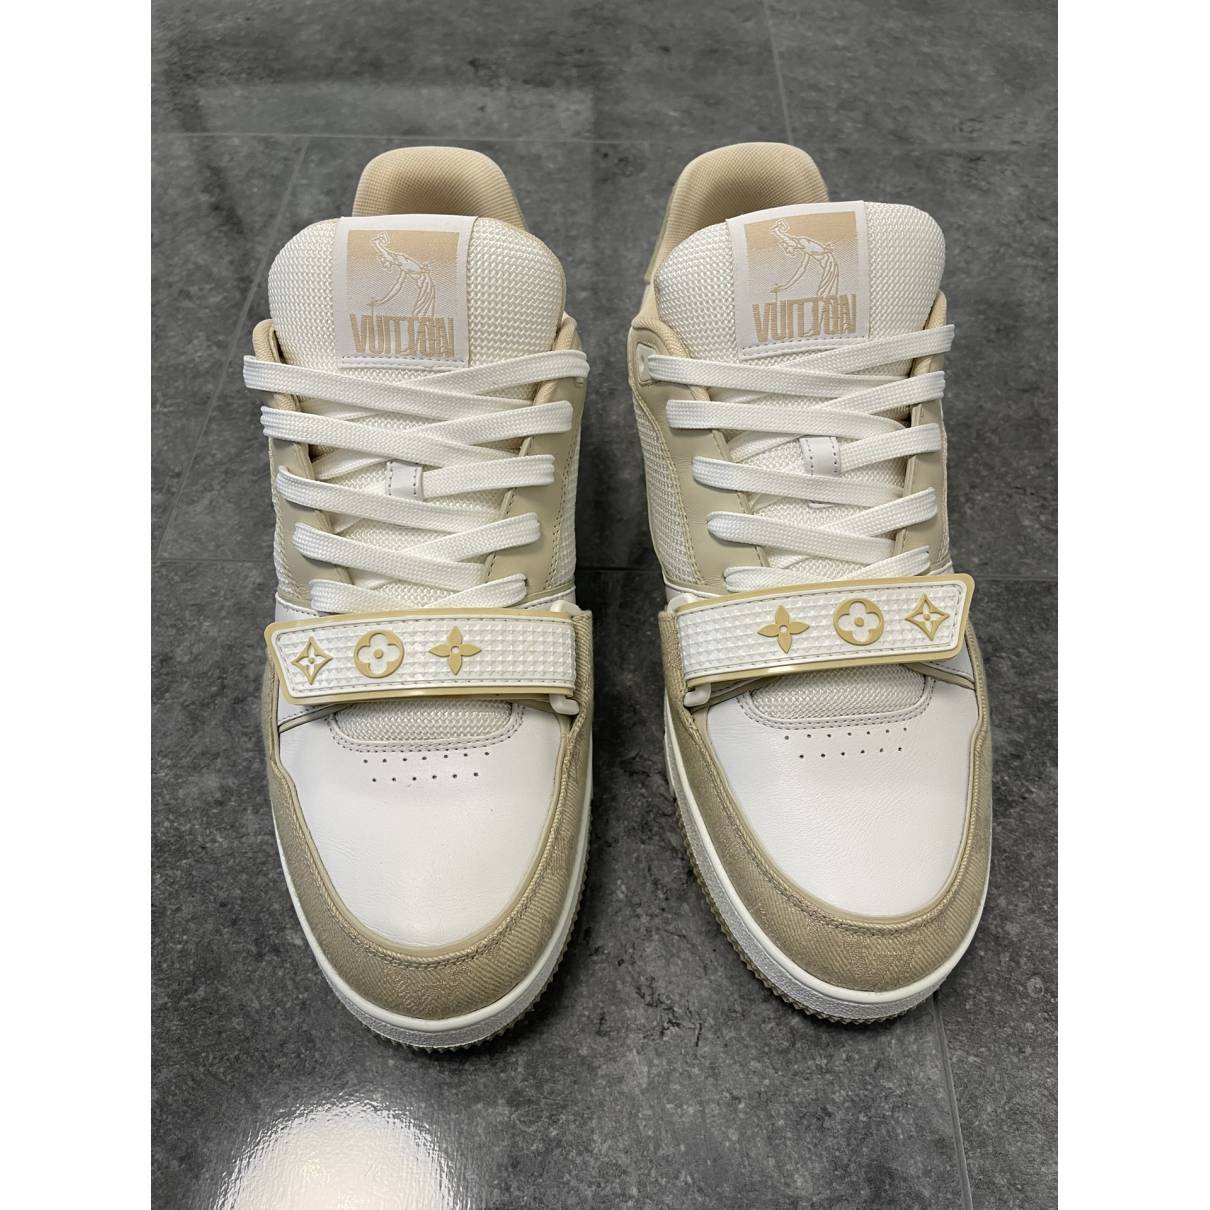 Lv trainer leather low trainers Louis Vuitton Beige size 41 EU in Leather -  31096164